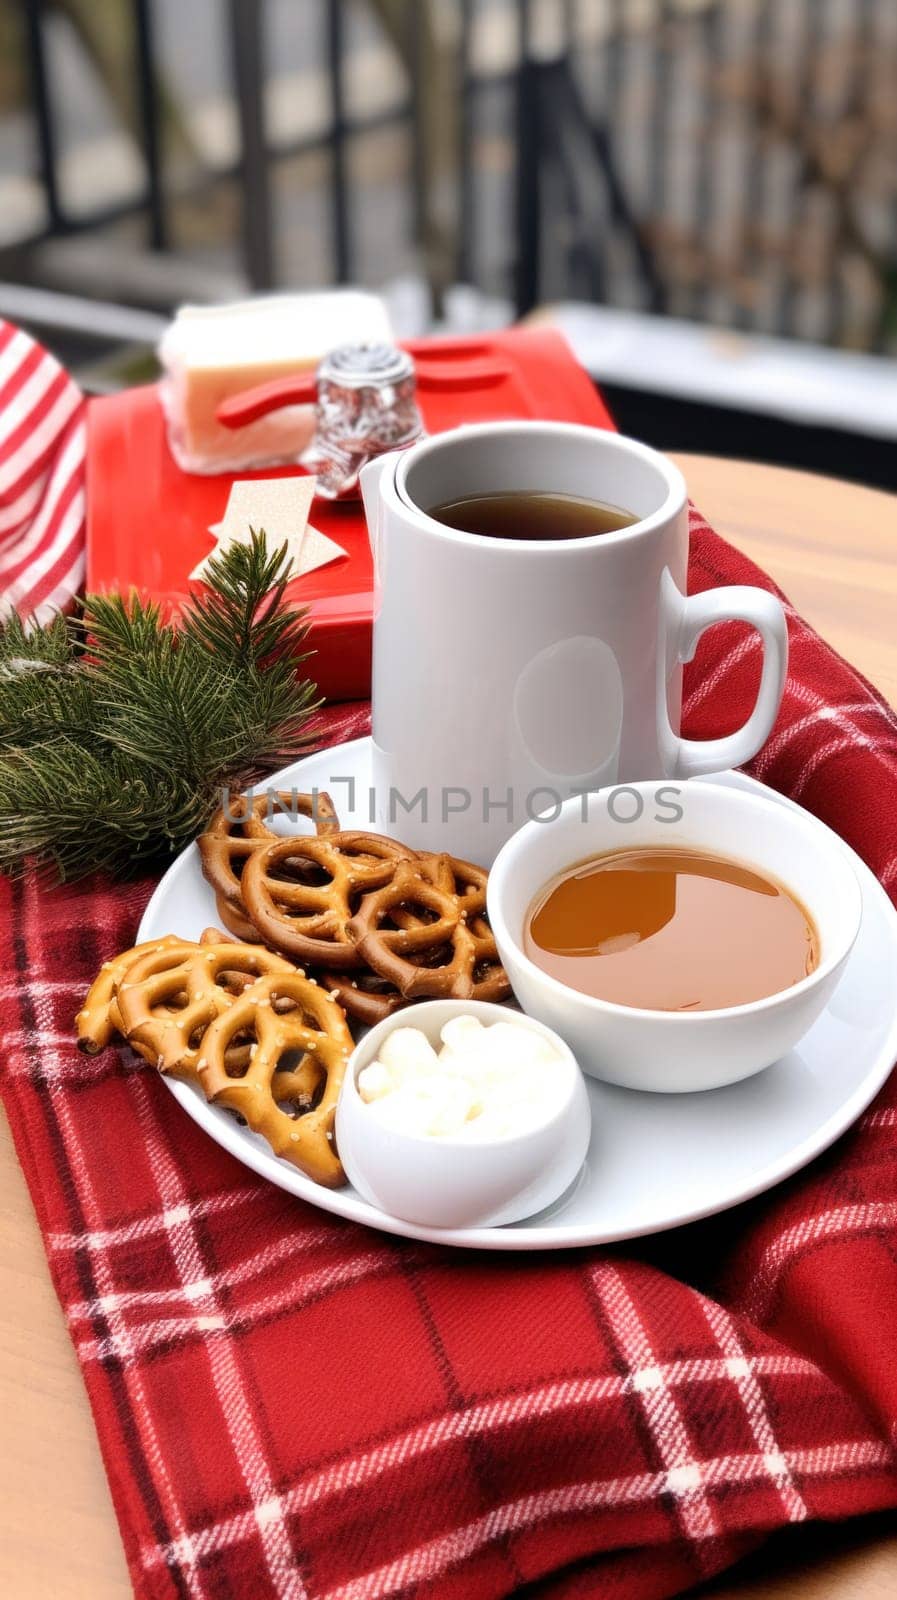 A plate of pretzels and a cup of coffee on a table, AI by starush